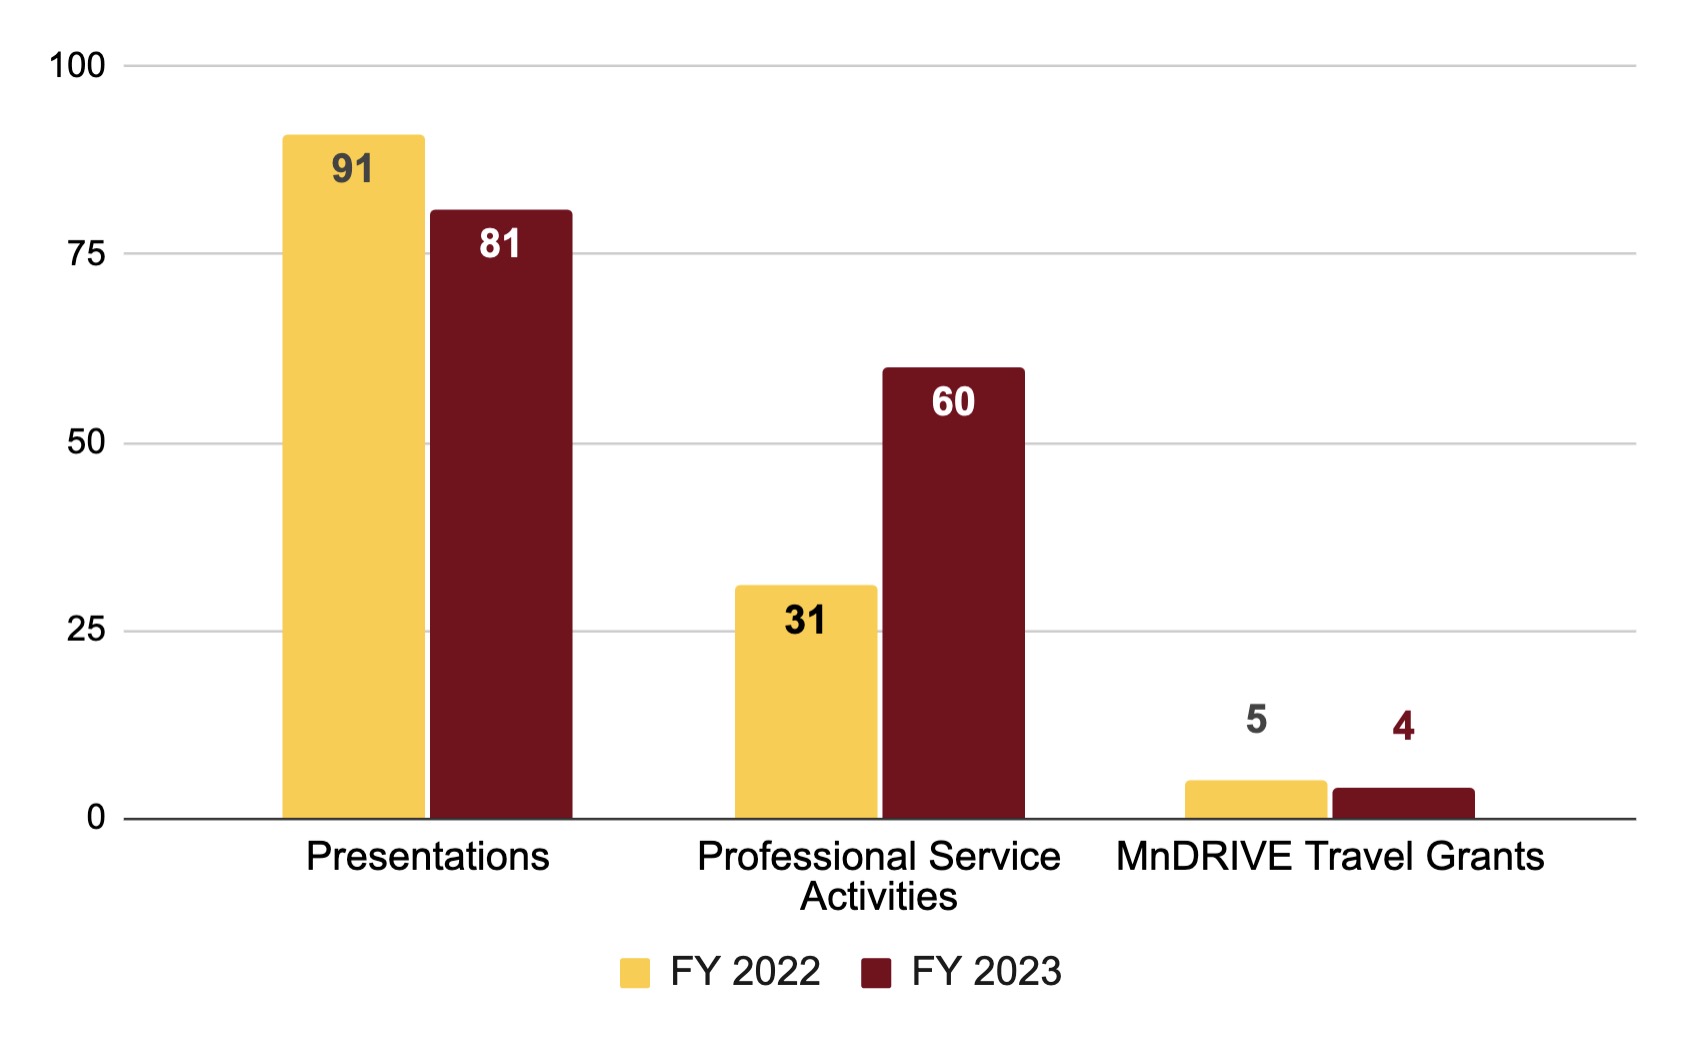 Chart: Presentations - 91 in FY 2022, 81 in FY 2023; Professional Service Activities - 31 in FY 2022, 60 in FY 2023; MnDrive Travel Grants - 5 in FY 2022, 4 in FY 2023